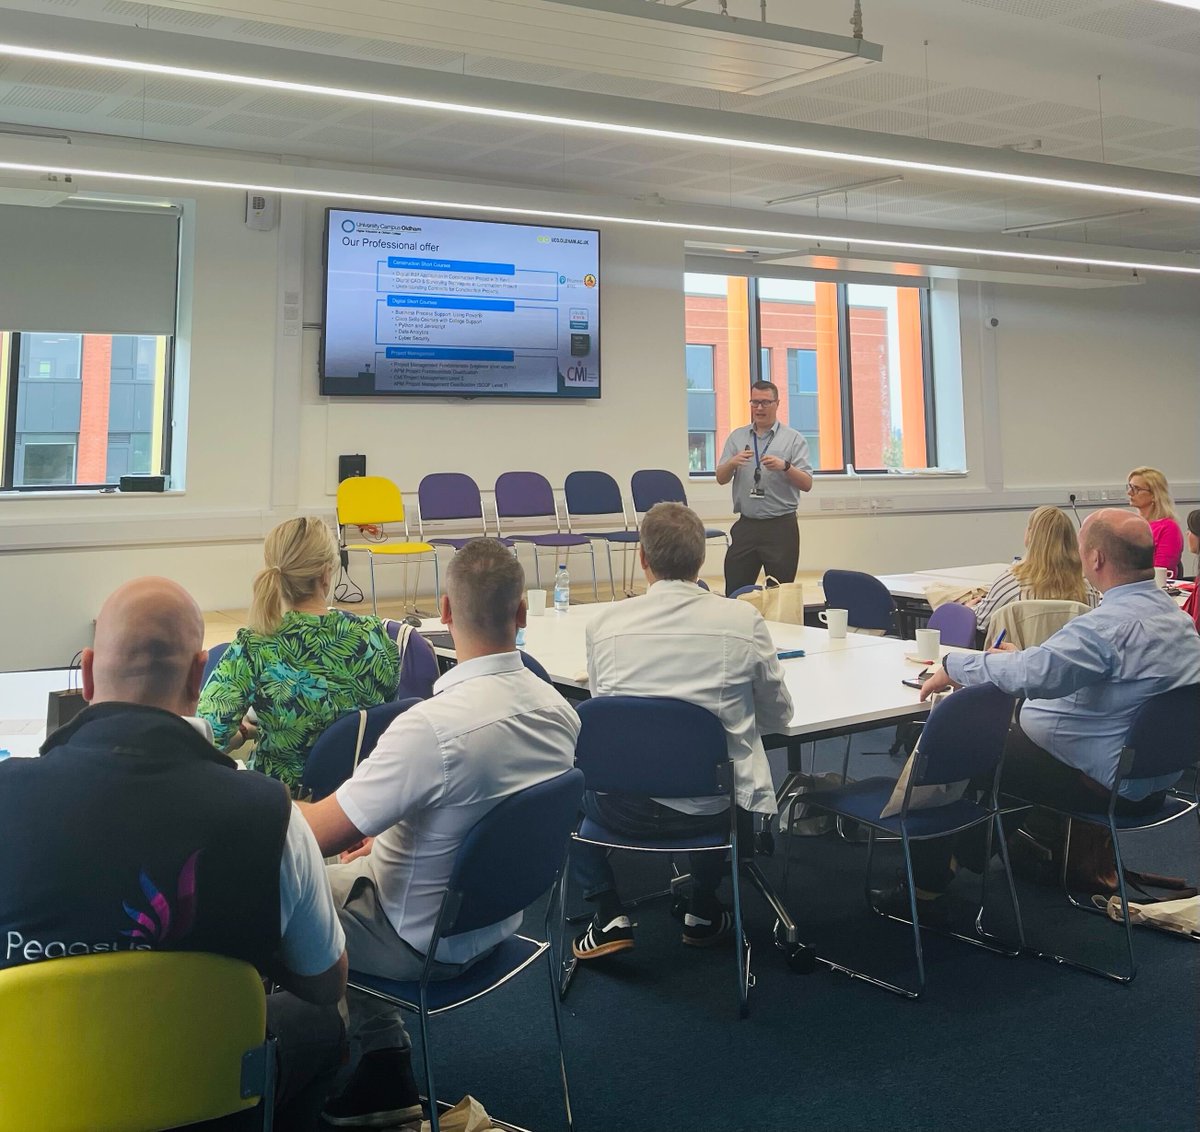 Today's employer event on sustainability explored courses offered at OC & @UC_Oldham & @OldhamCouncil's plans for transitioning to Net Zero @cllrabduljabbar A panel shared steps businesses can take - thanks to Oldham Council @iMS__Tech @sse Pegasus Warehousing & Fulfilment Ltd.!